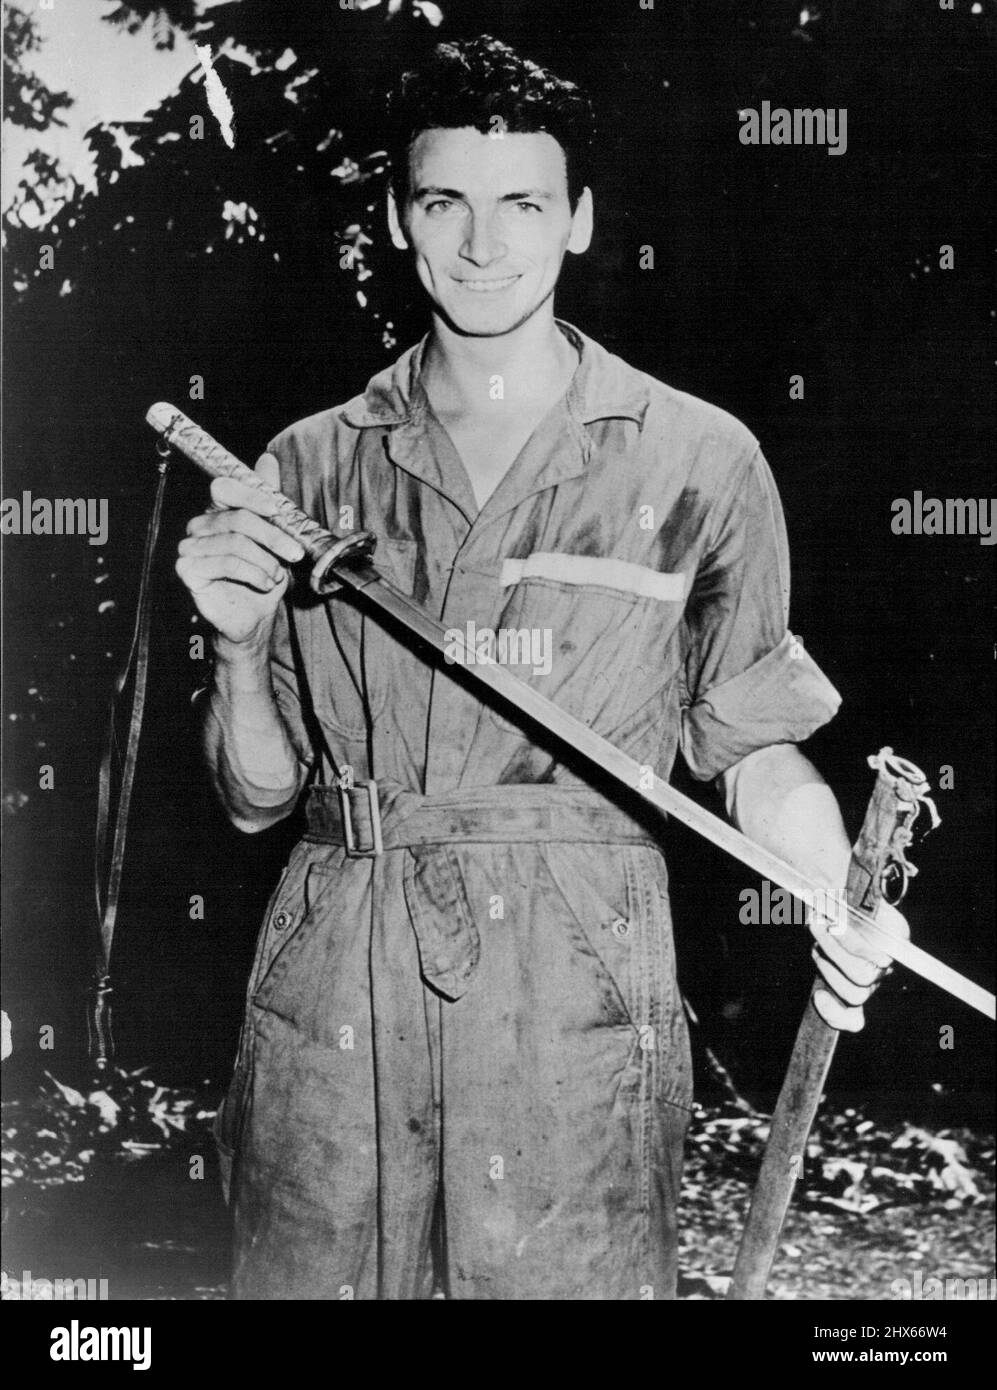 Trophy Taken From A Fallen Japanese Officer -- A corporal of the U.S. Army Air Forces displays a Japanese sword and scabbard taken from a dead enemy officer in the fighting on Guadalcanal in the Solomon Islands. February 8, 1943. (Photo by Interphoto News Pictures, Inc.). Stock Photo